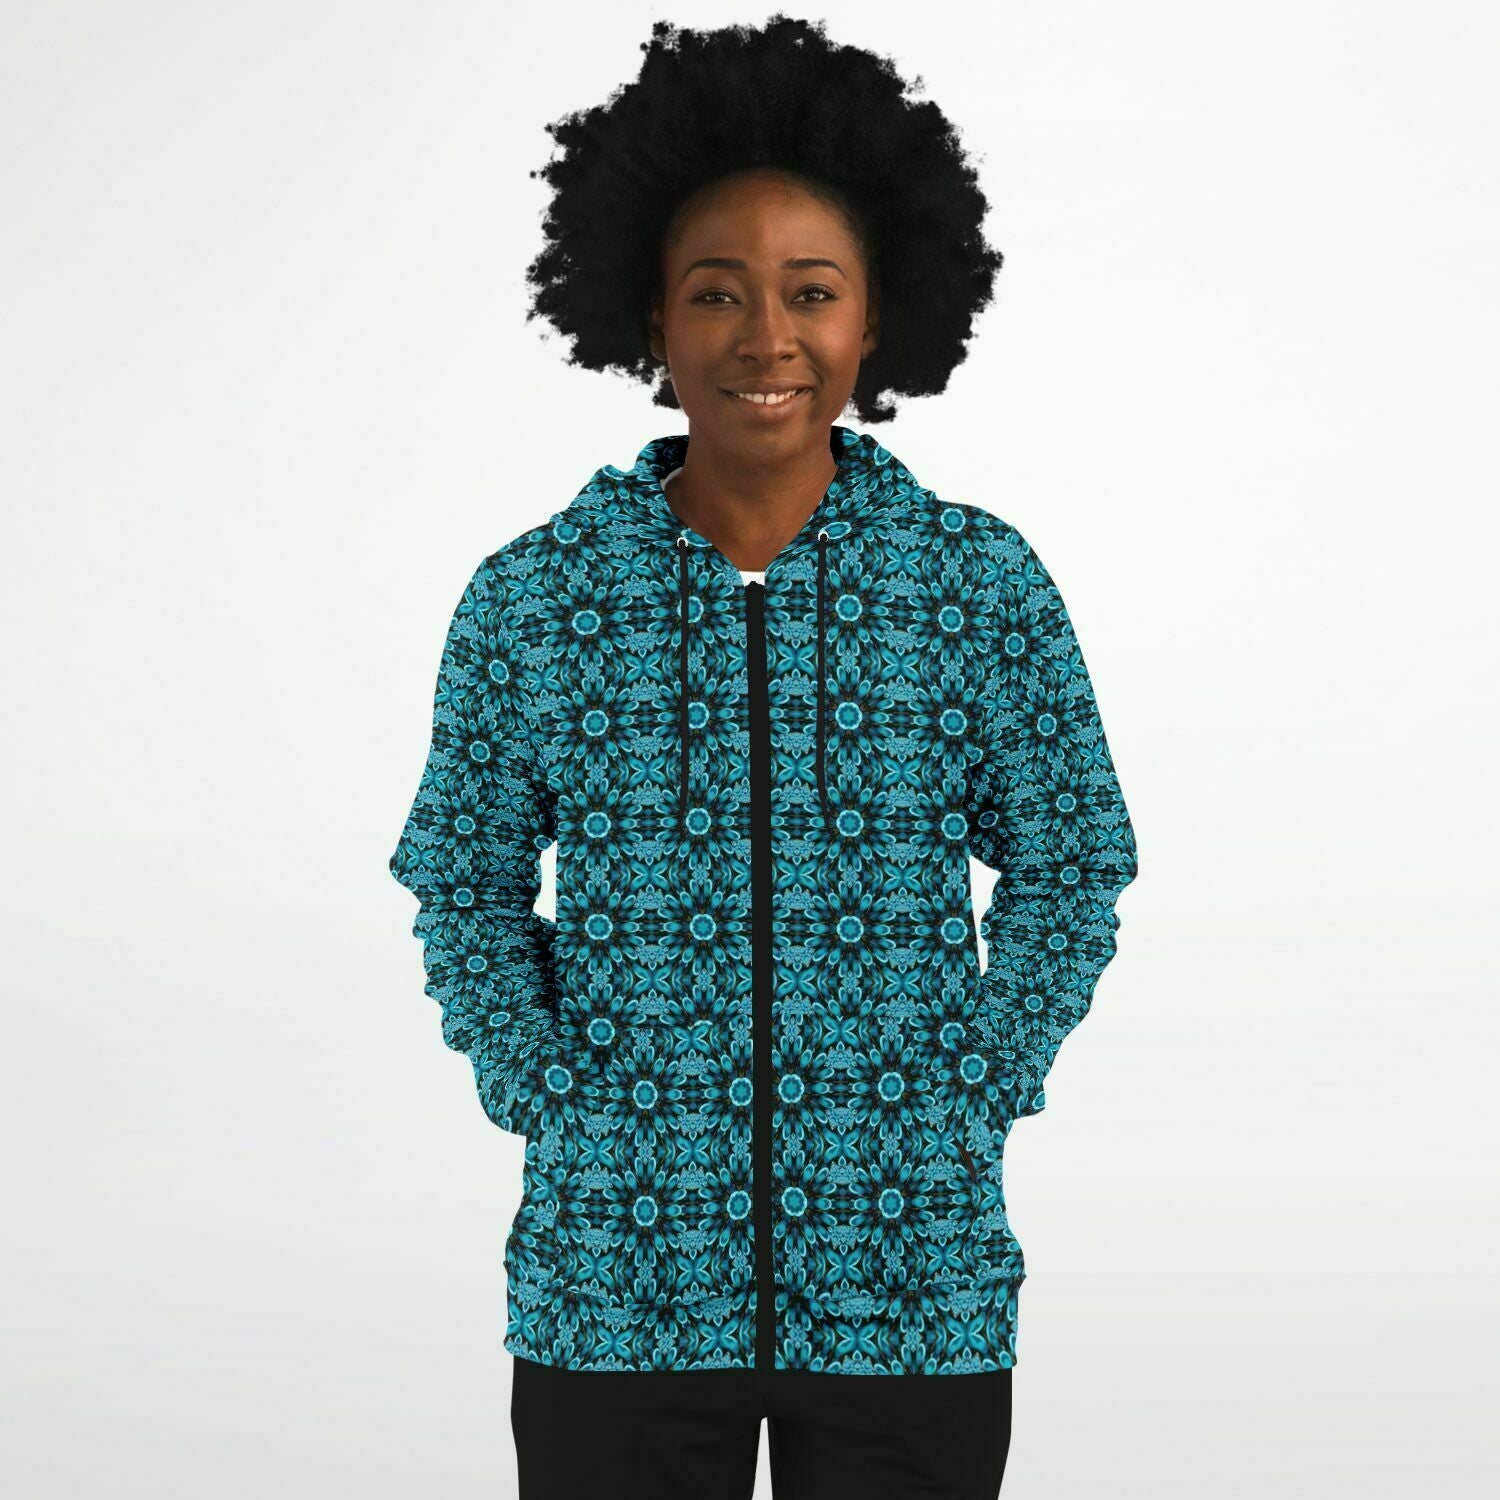 black hoodie for women with blue flower print 